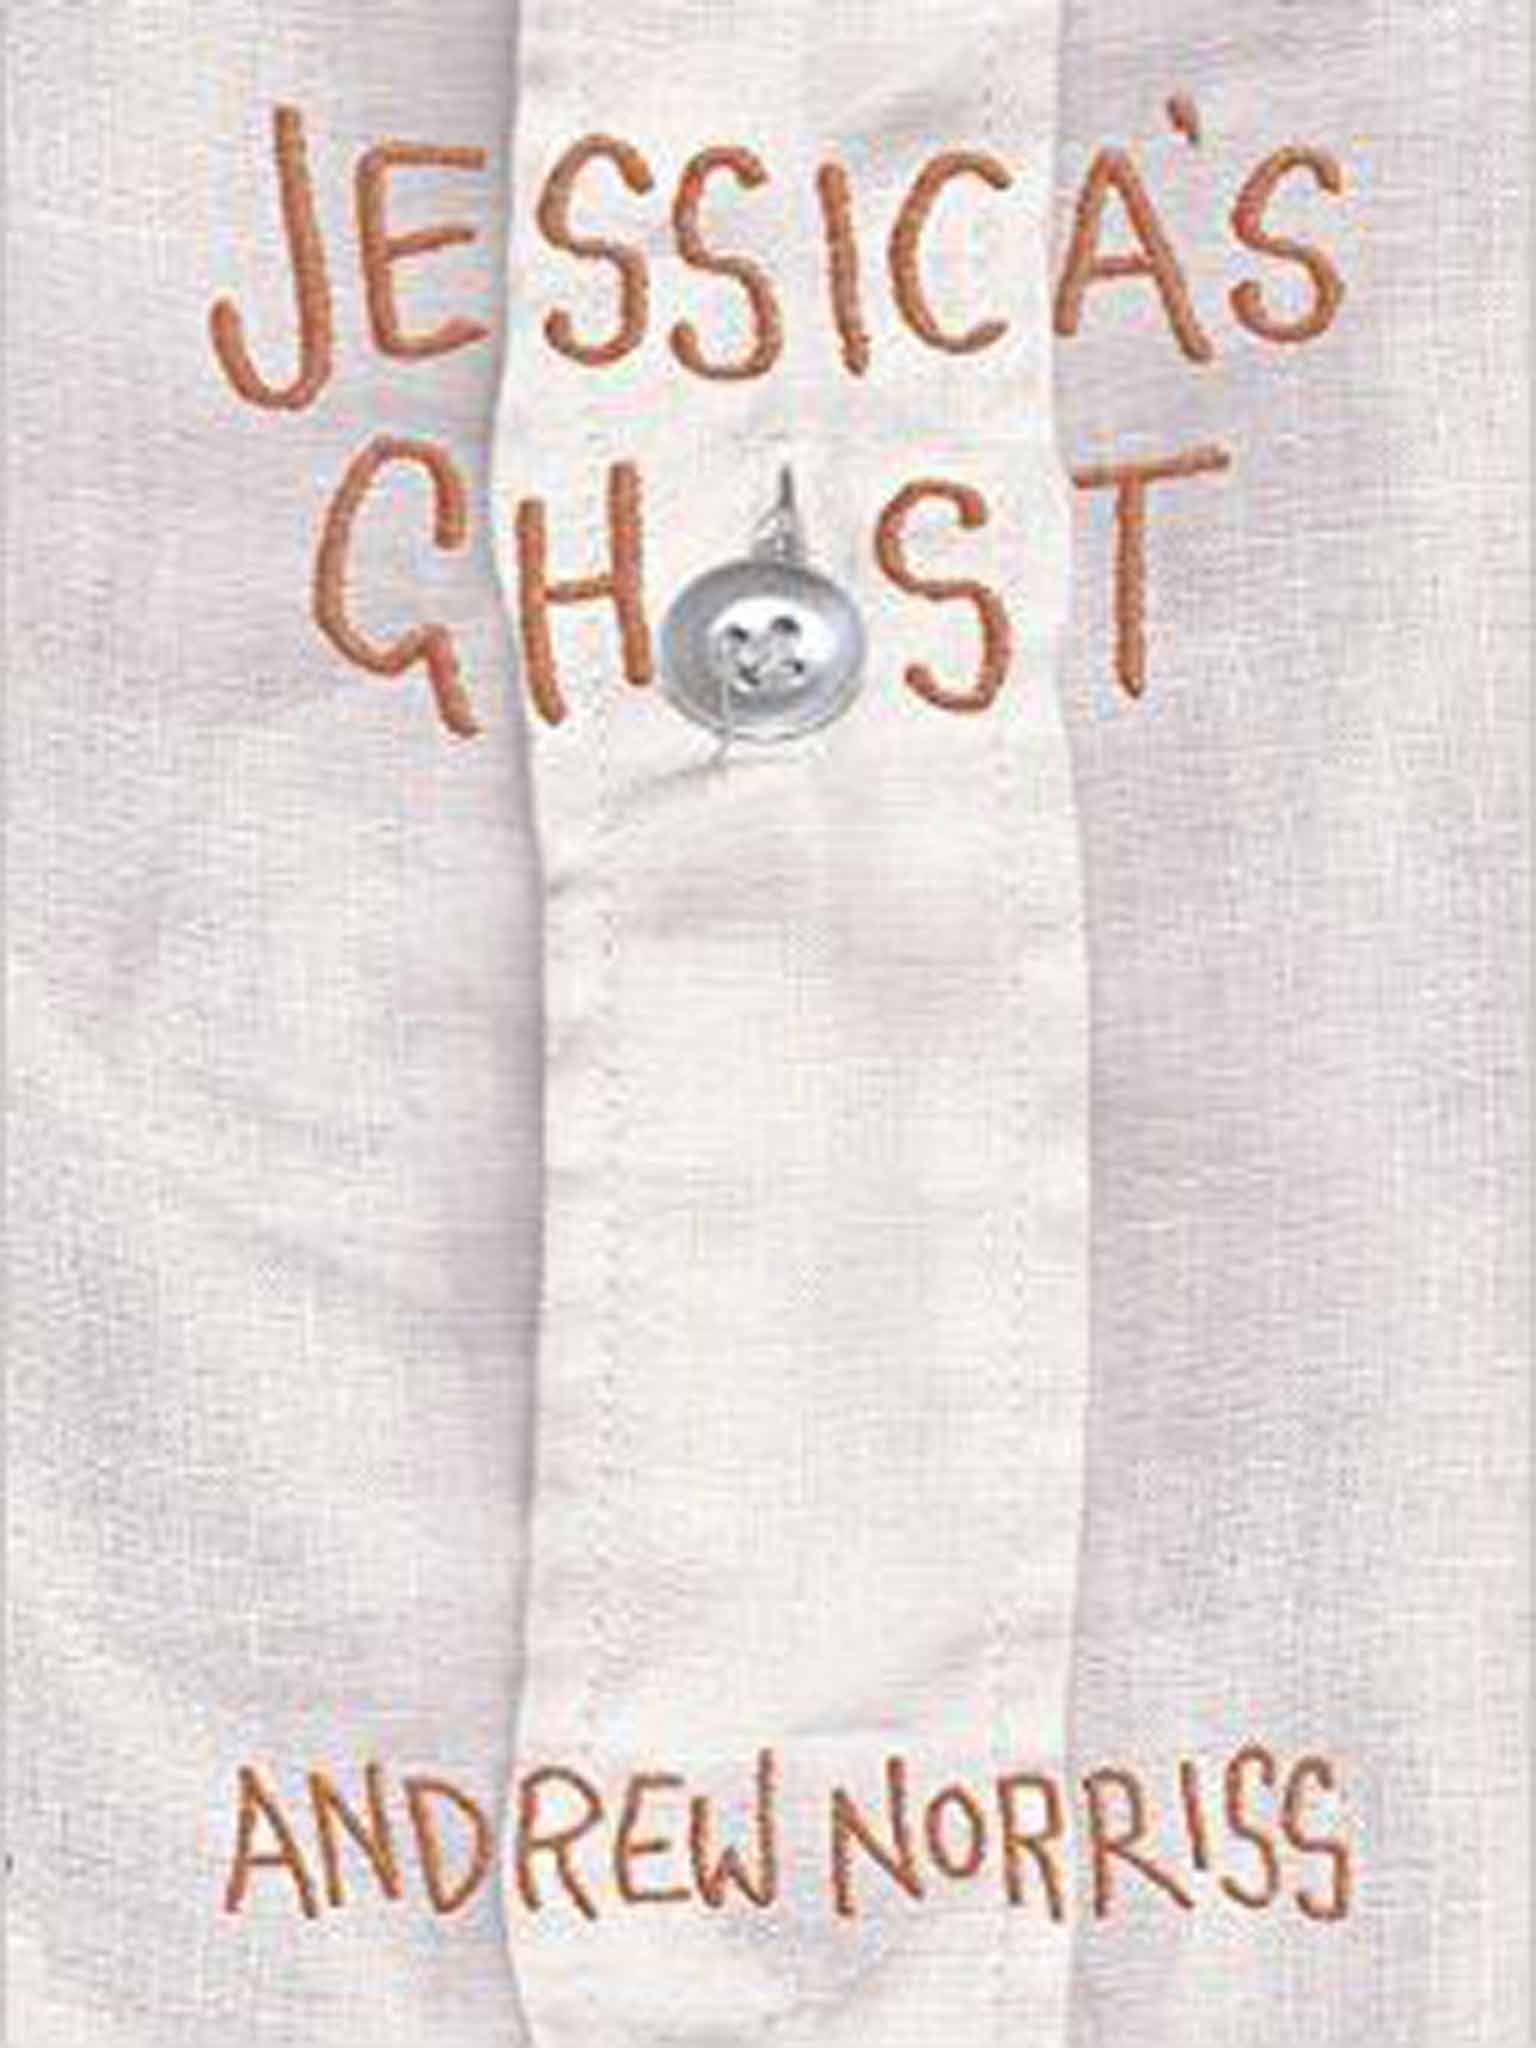 Andrew Norriss: Jessica’s Ghost (David Fickling 11+) - Why can a lonely boy see and talk to a ghost? A spooky comedy turns into a heartening account of teenage depression especially for boys.